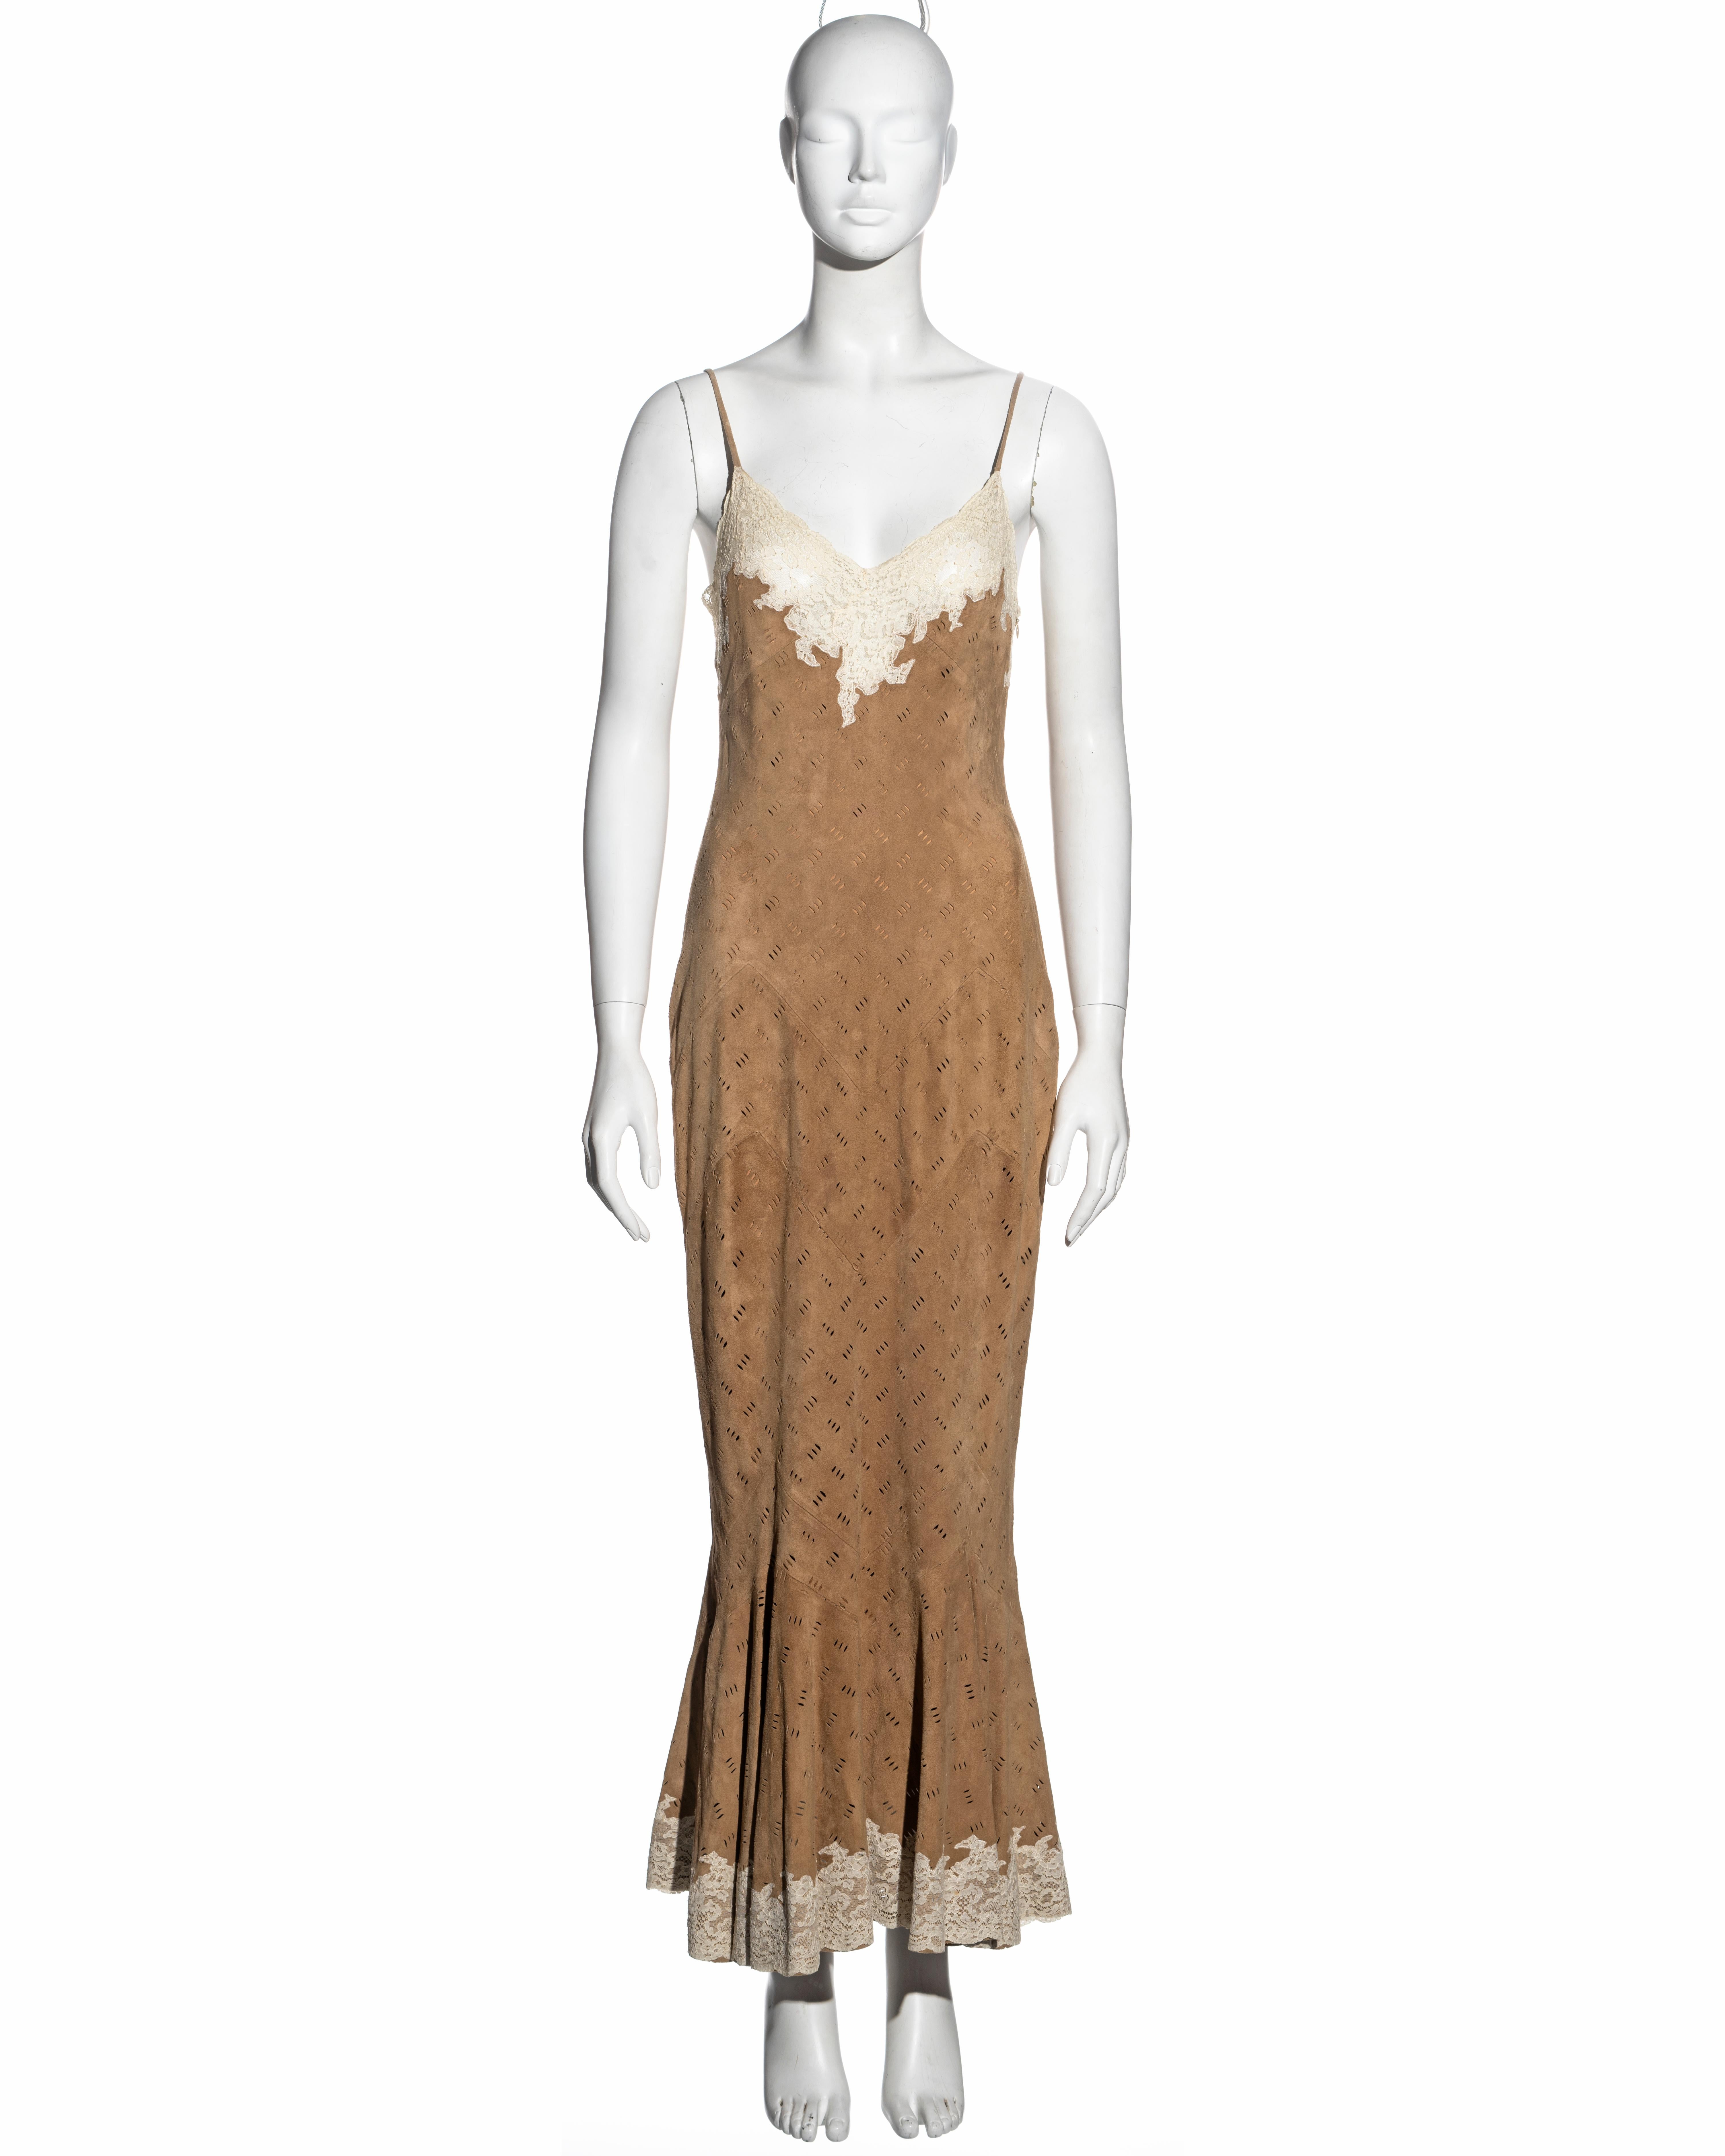 ▪ Brand: Christian Dior 
▪ Creative Director: John Galliano 
▪ Collection: Fall-Winter 1999 
▪ Fabric: Laser-Cut Suede, Lace, Silk 
▪ Details: Cream lace trim 
▪ Size: FR 40 - UK12 - US8 
▪ Made in: France 
▪ Condition: Very Good 
▪ Mannequin: 183